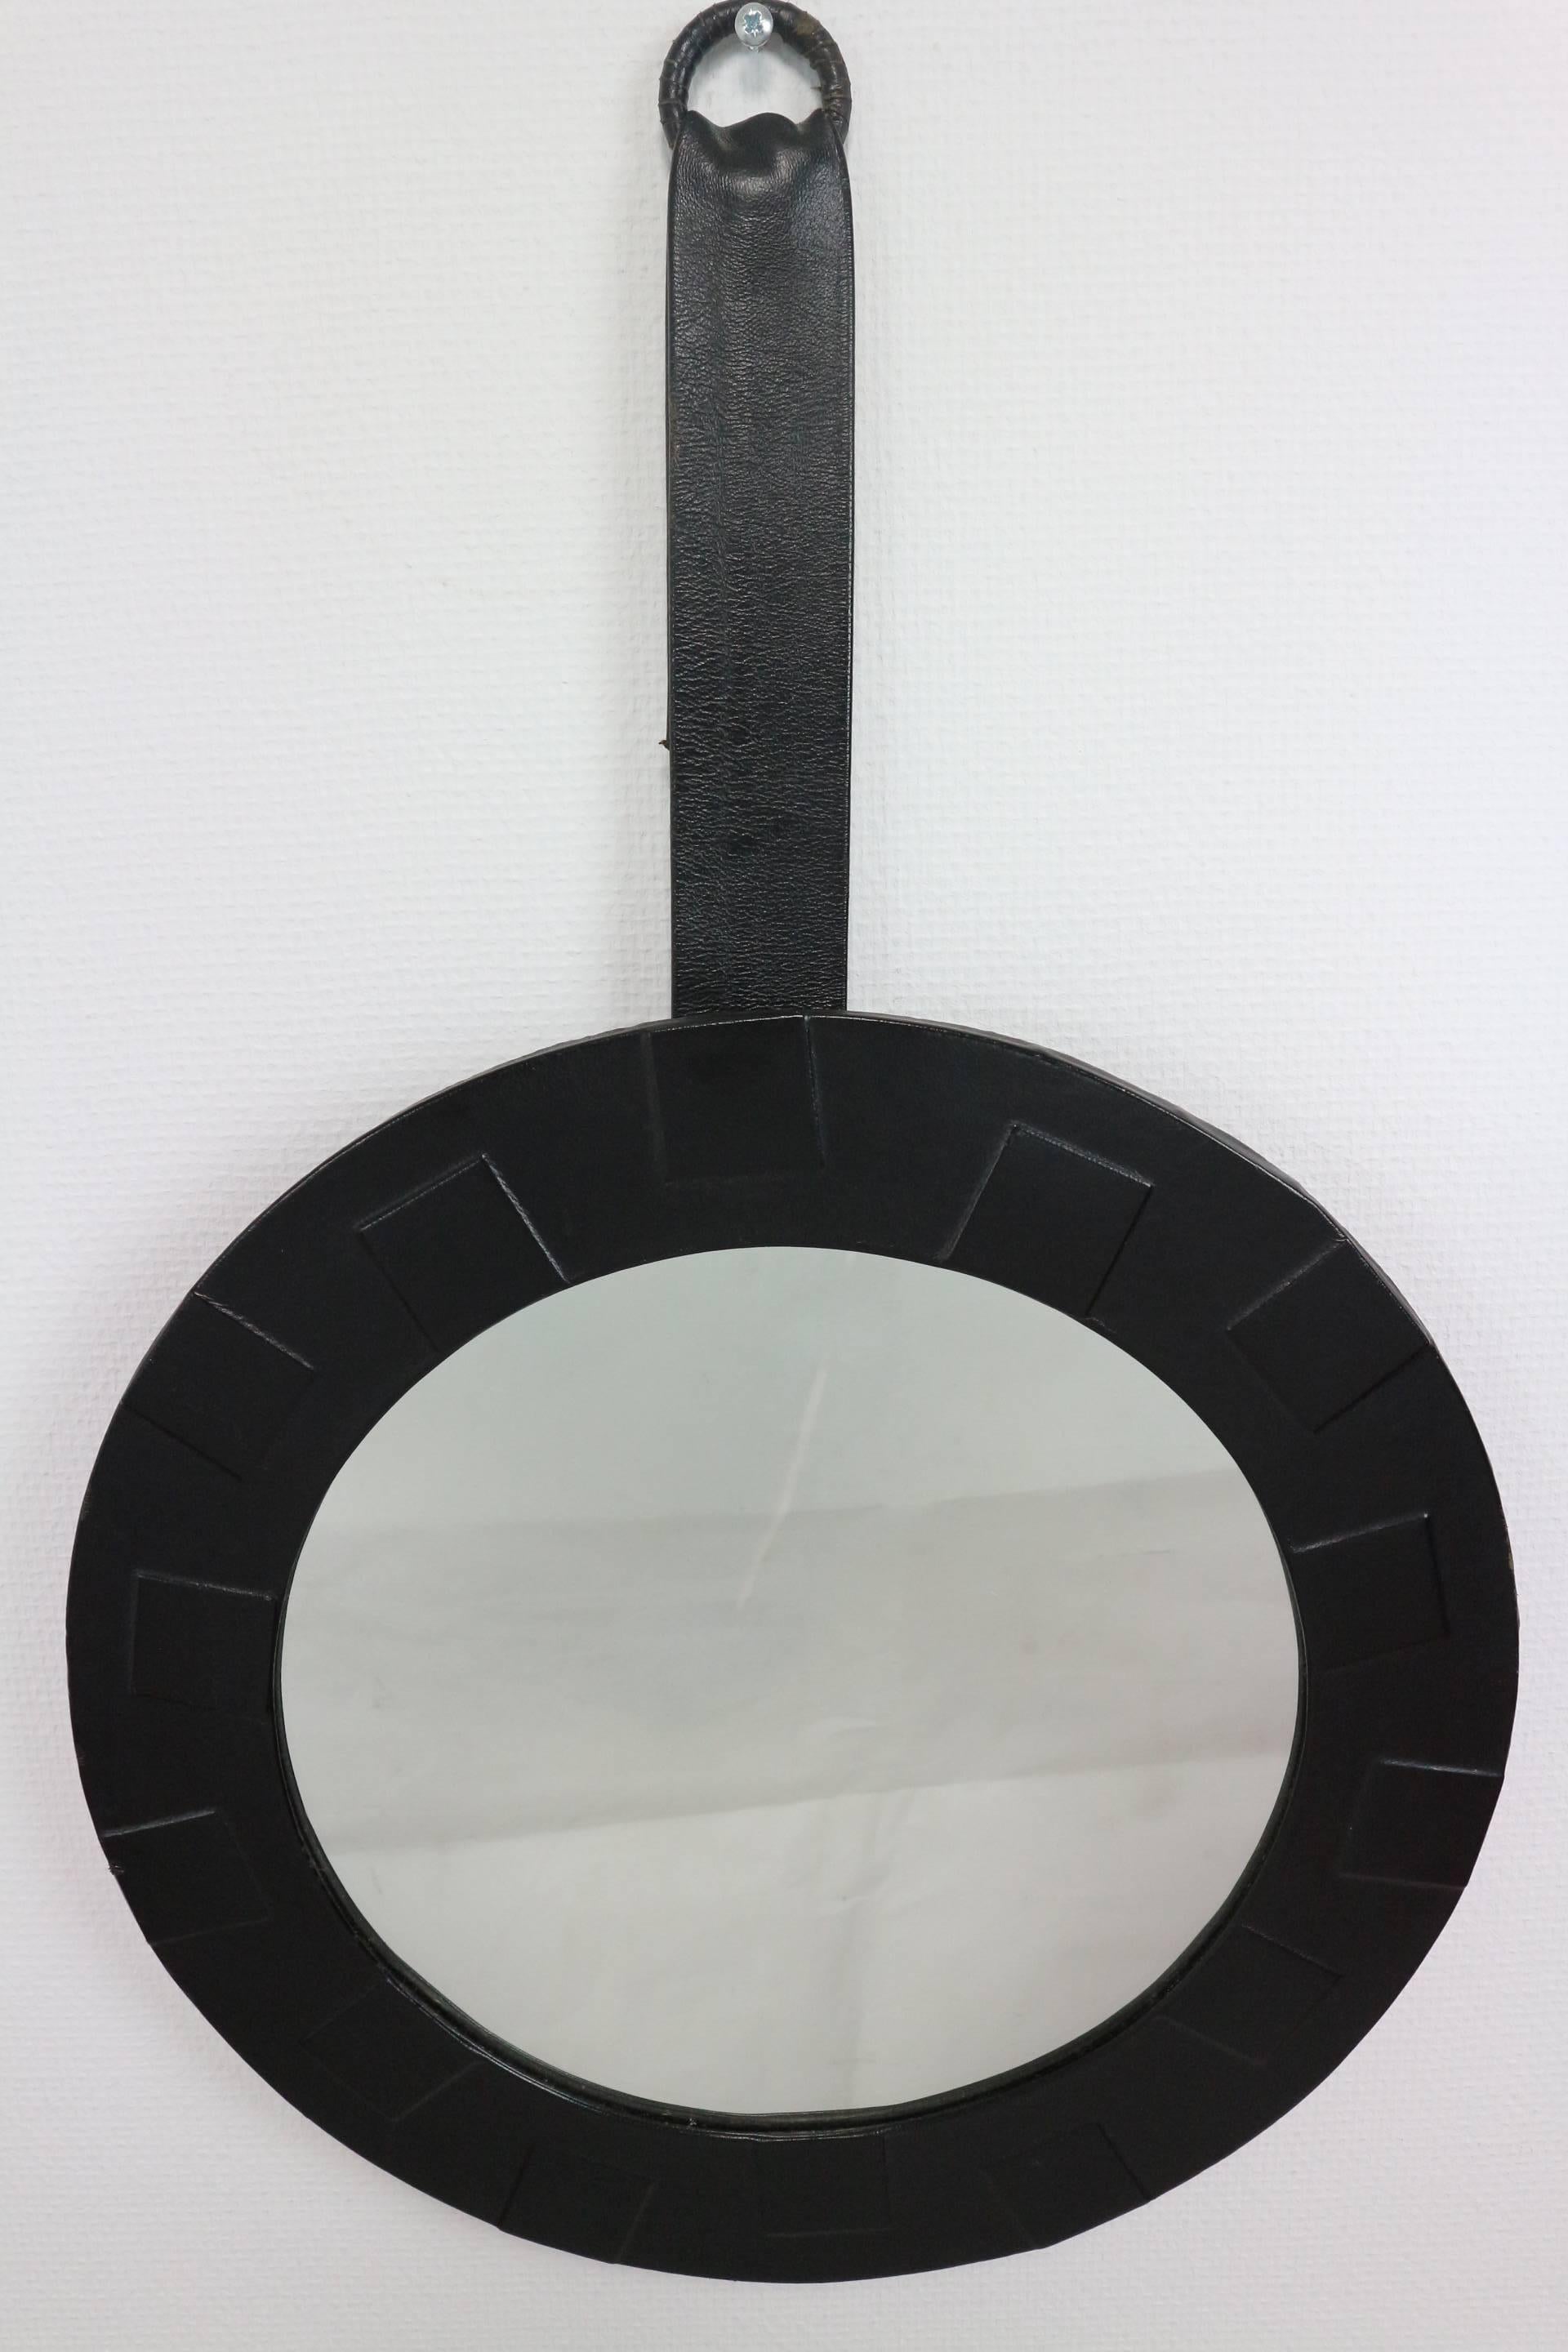 Unique design, round mirror framed in black leather and leather covered hang-system. 

We ship worldwide, do not hesitate to contact us. We inform you about the best price available, customized to your order. We make sure your purchased item is